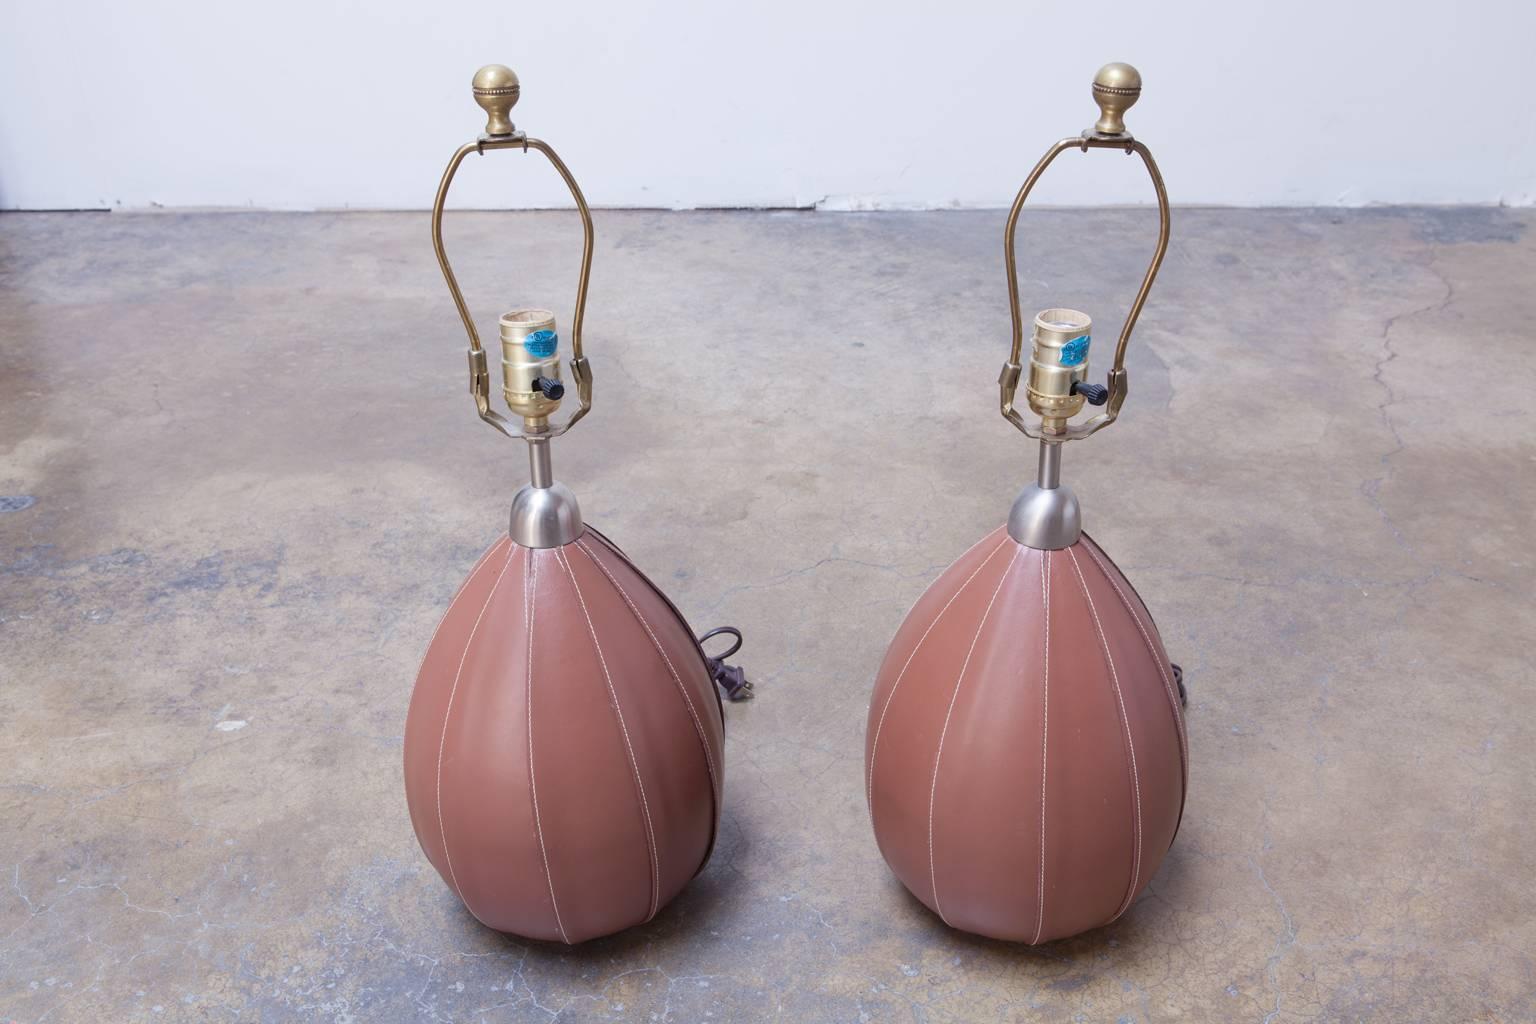 Rare designer lamps featuring top grade leather stitched covers over melon shaped bodies. Topped by brushed nickel covers and brass hardware with finials. No shades included.